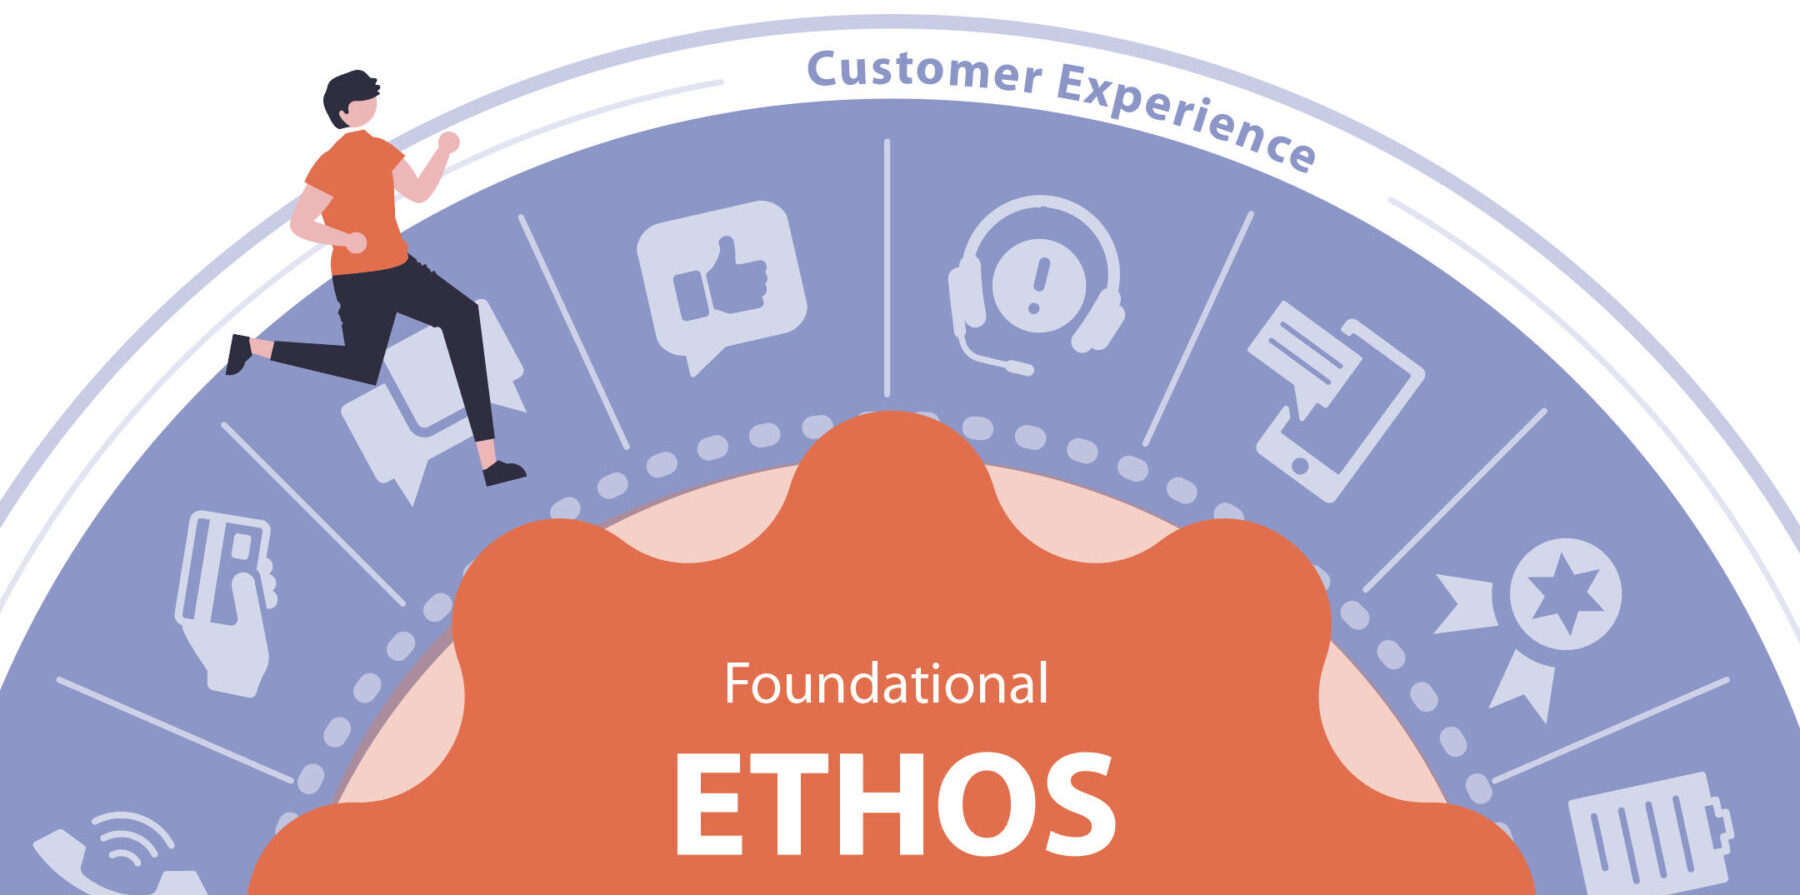 5 steps to define the ethos of your service - ThoughtForm, Inc.